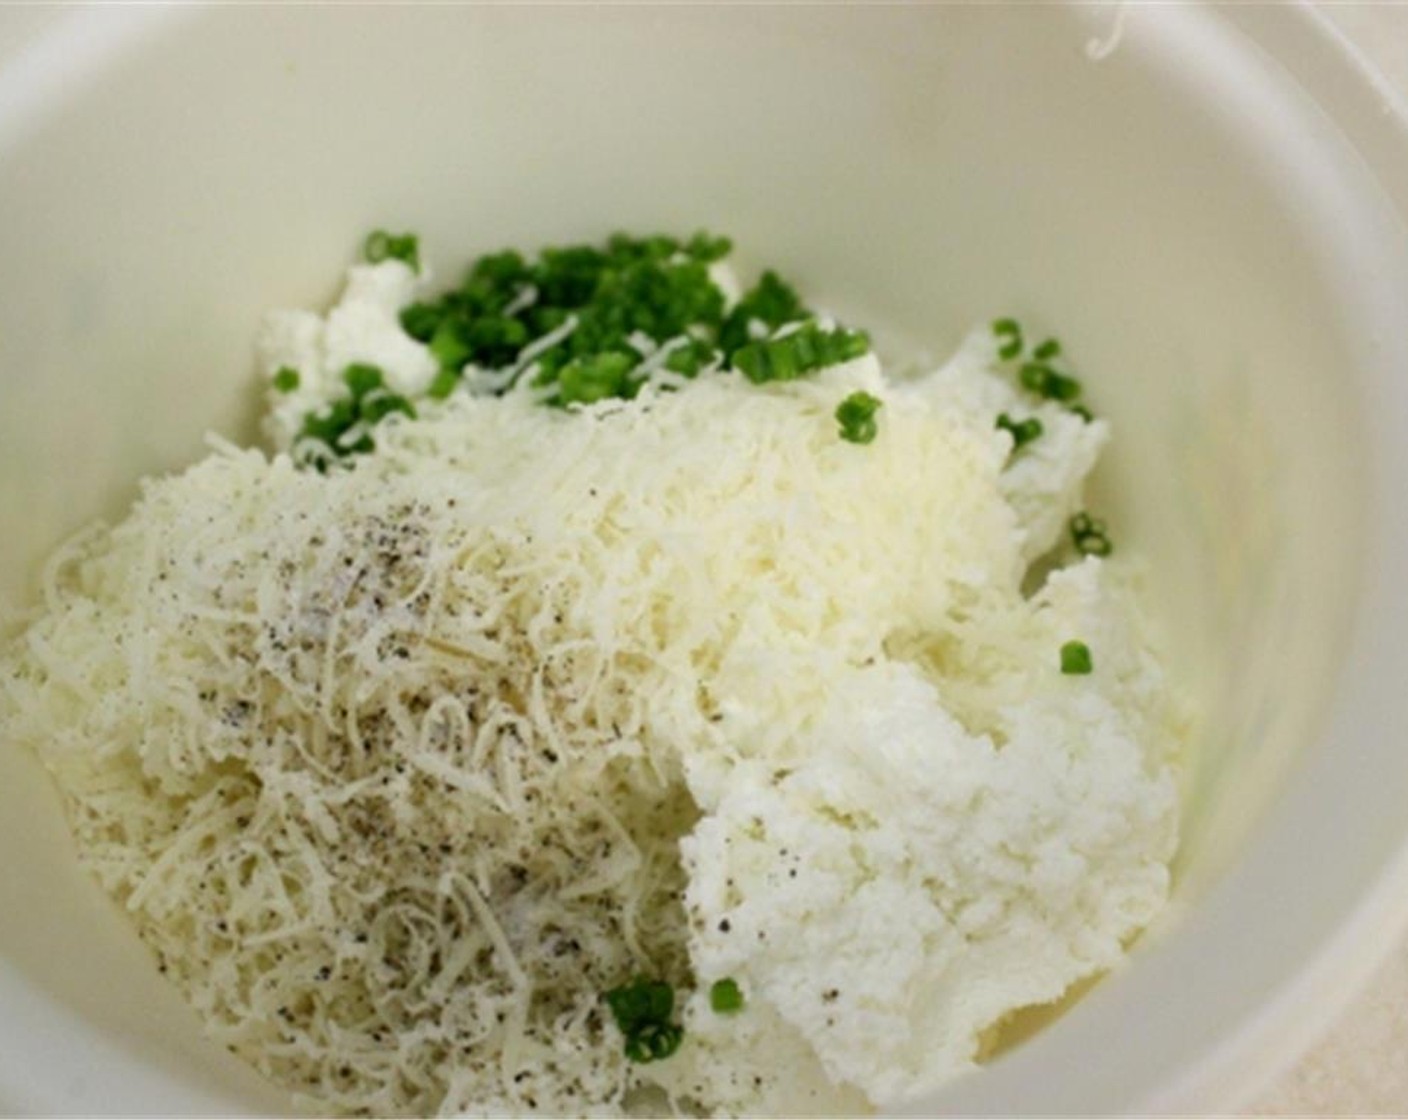 step 3 For the cheese filling, combine in another bowl the Farmers Cheese (1/2 cup), Mozzarella Cheese (1 cup), Fresh Parsley (to taste), Fresh Chives (to taste), and Heavy Cream (2 Tbsp). Season with Salt (to taste) and Ground Black Pepper (to taste). Mix to combine.